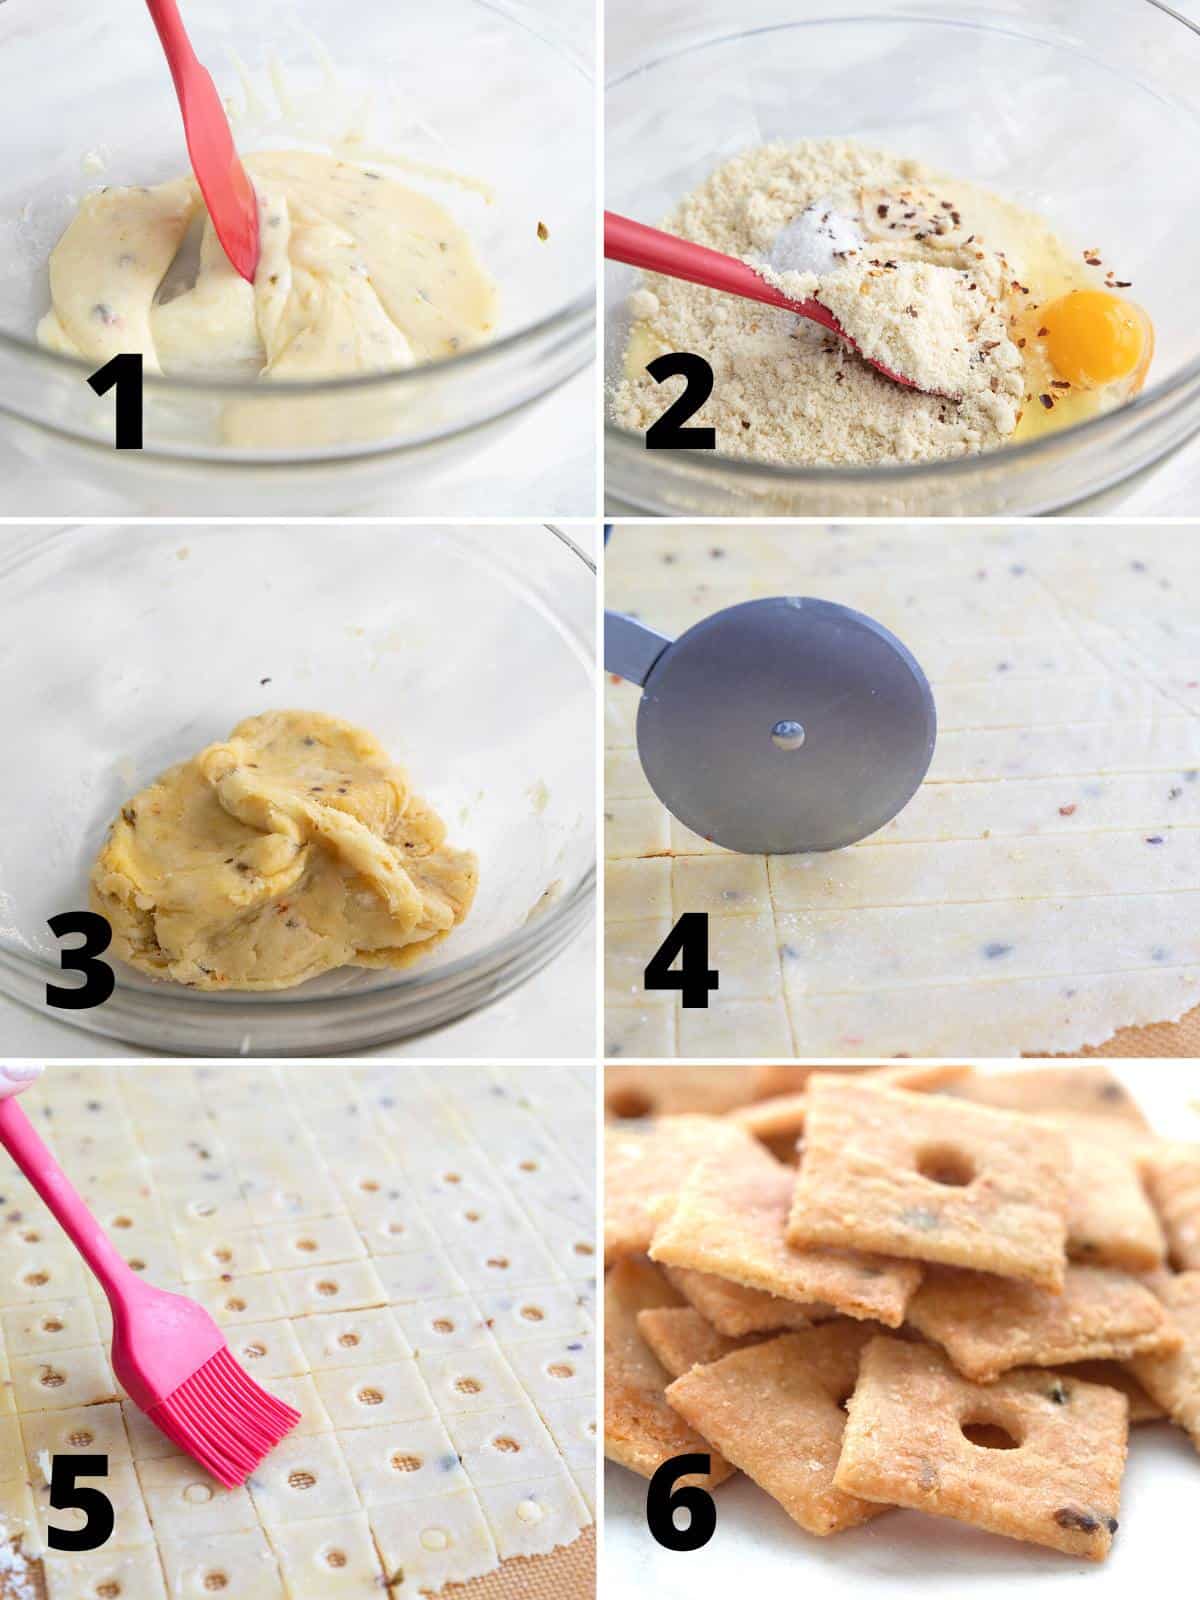 A collage of 6 images showing the steps for making keto cheese crackers.